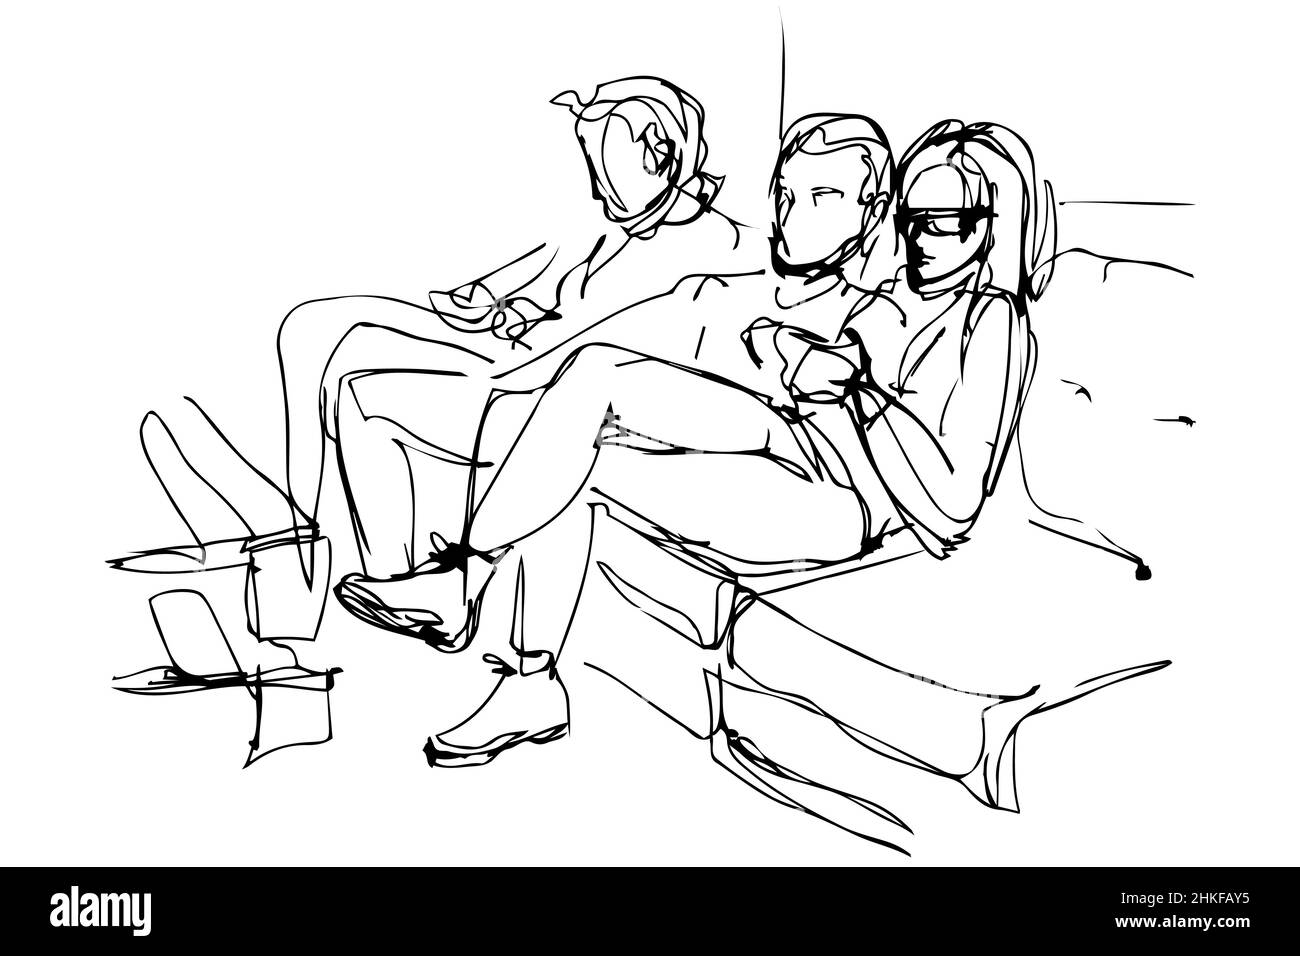 black and white vector sketch of two boys and a girl sitting on the couch Stock Photo